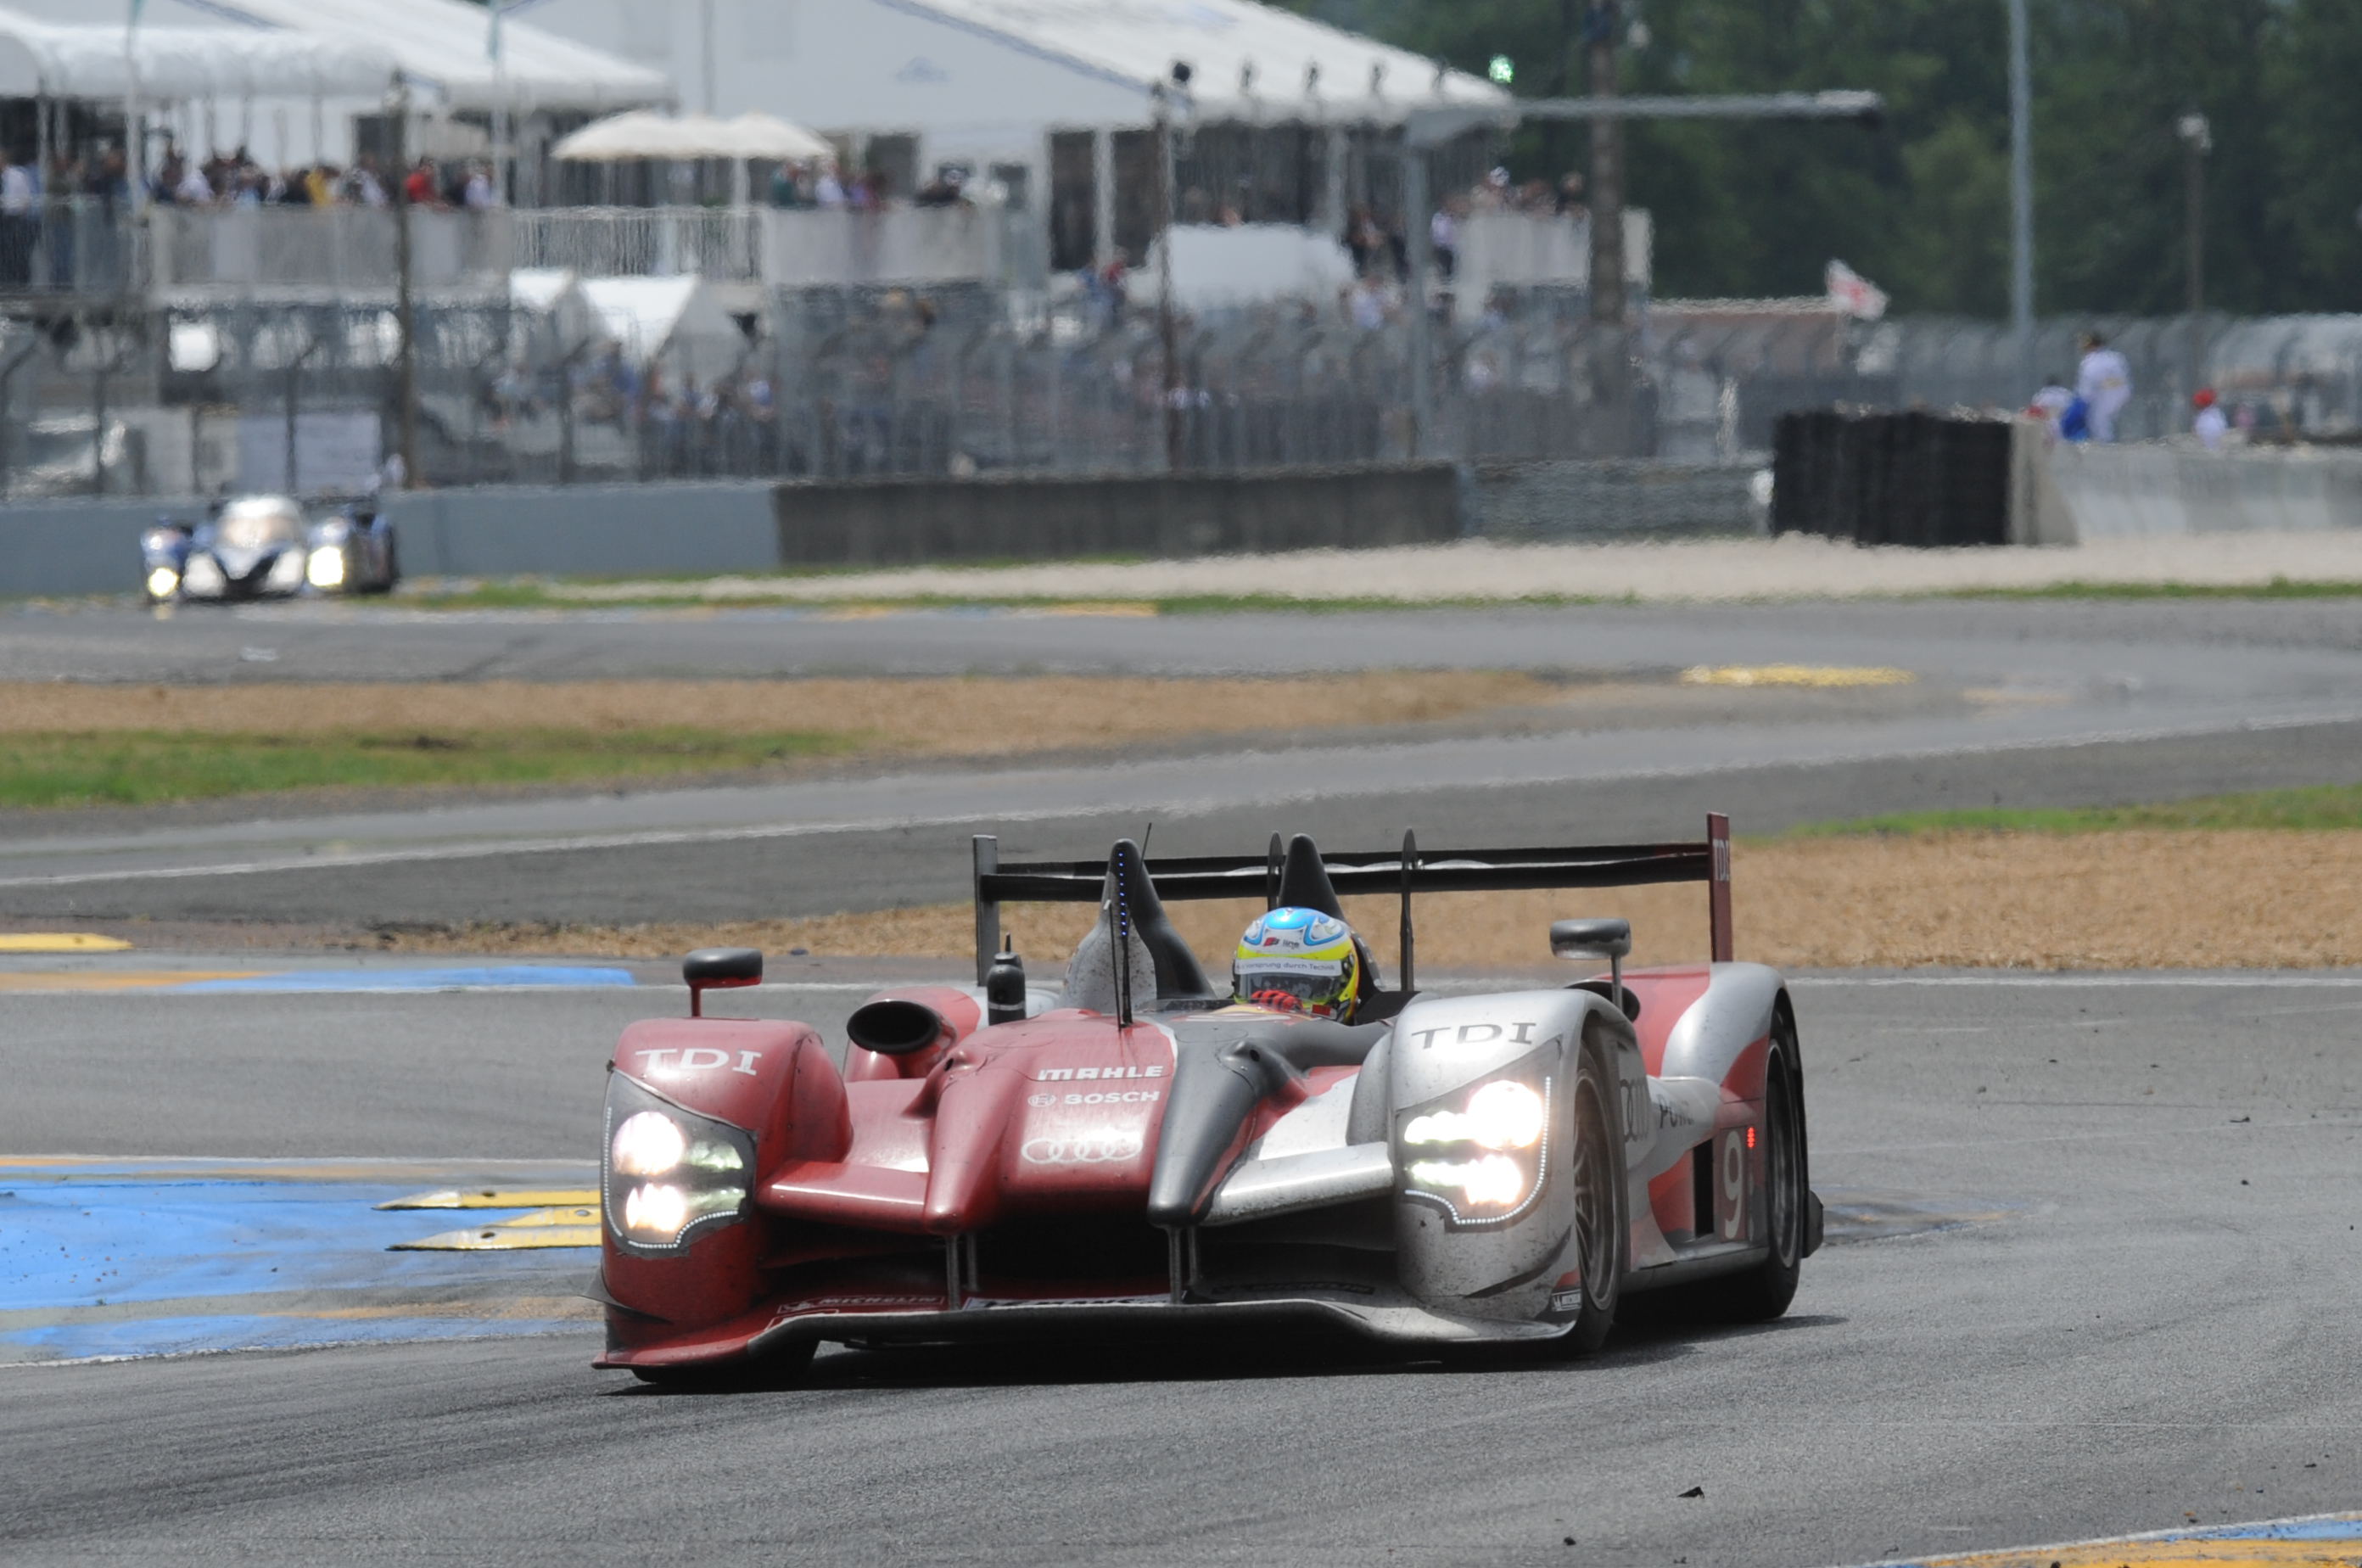 The last win (a hat trick) for an open cockpit car at Le Mans. The V10 TDI proved formidable and extremely reliable.